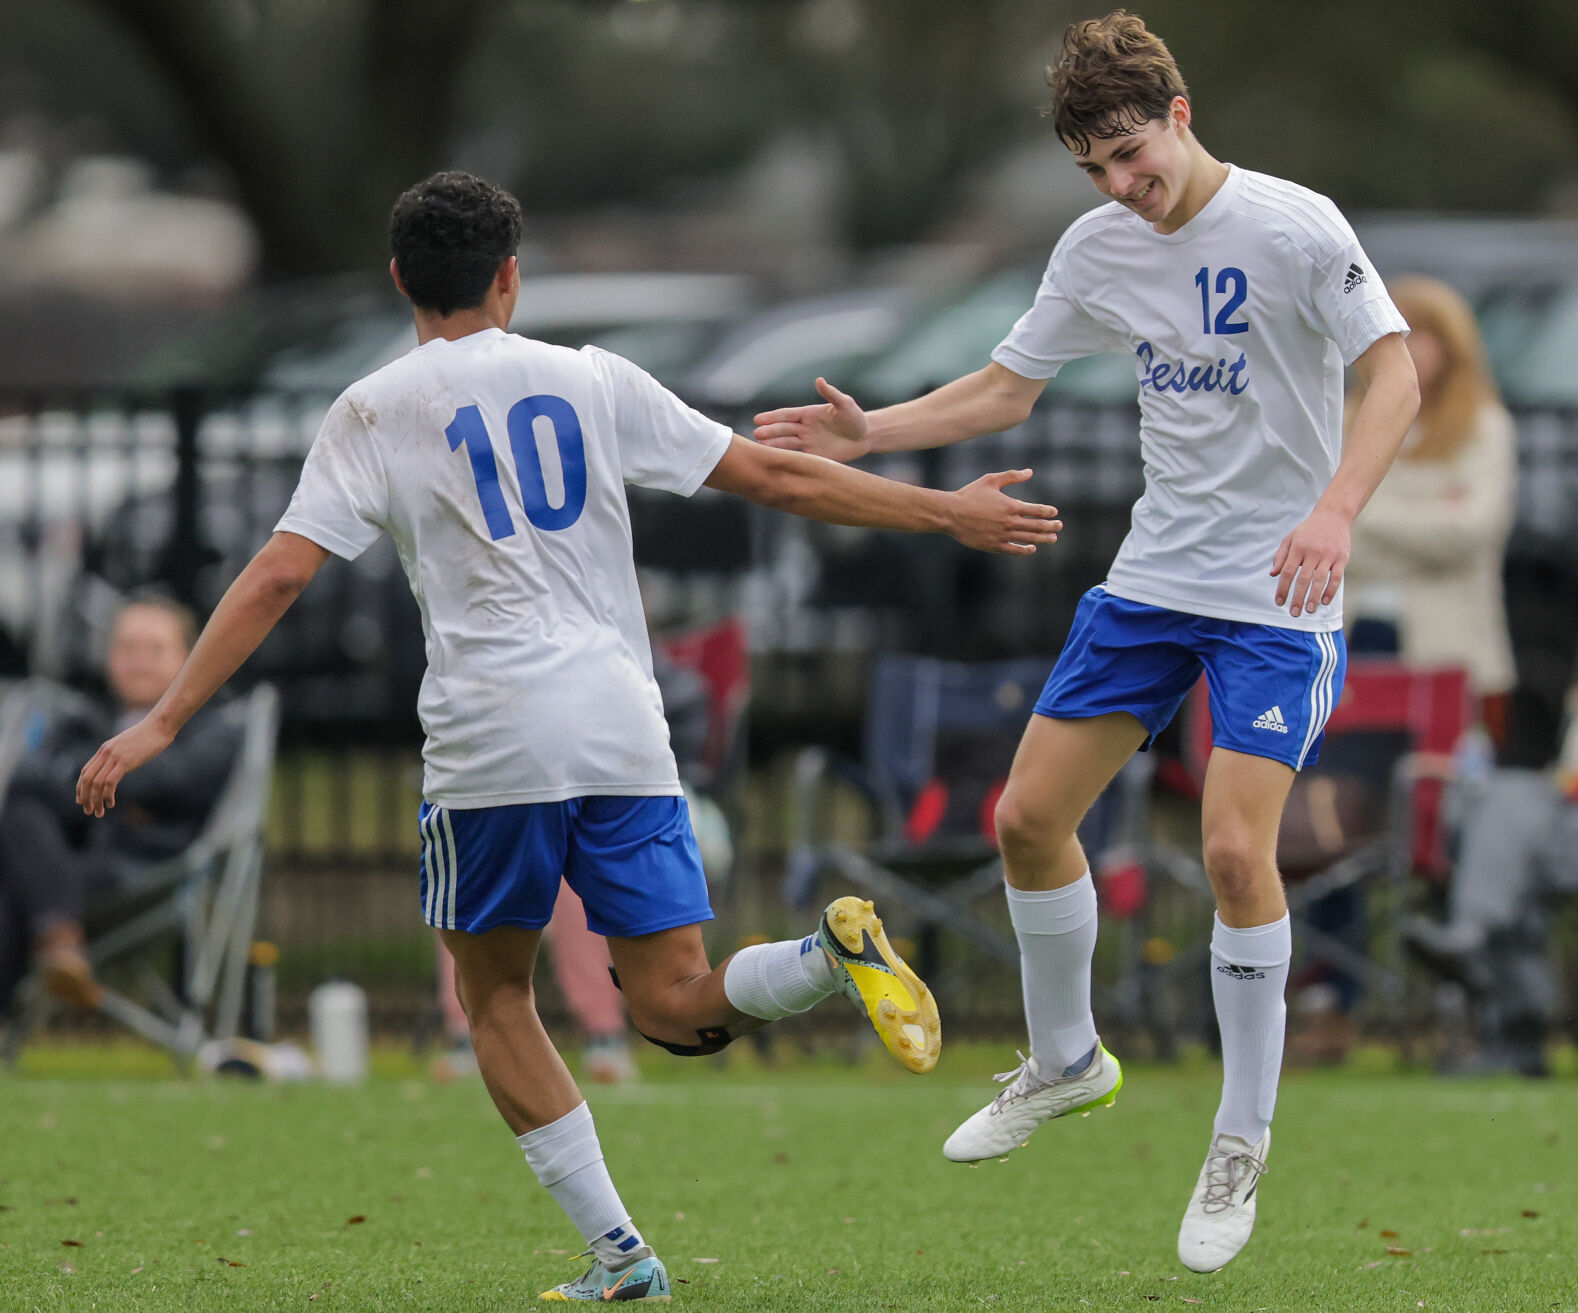 Jesuit seniors lead the way in dominant victory – 15 shutouts in 18 matches